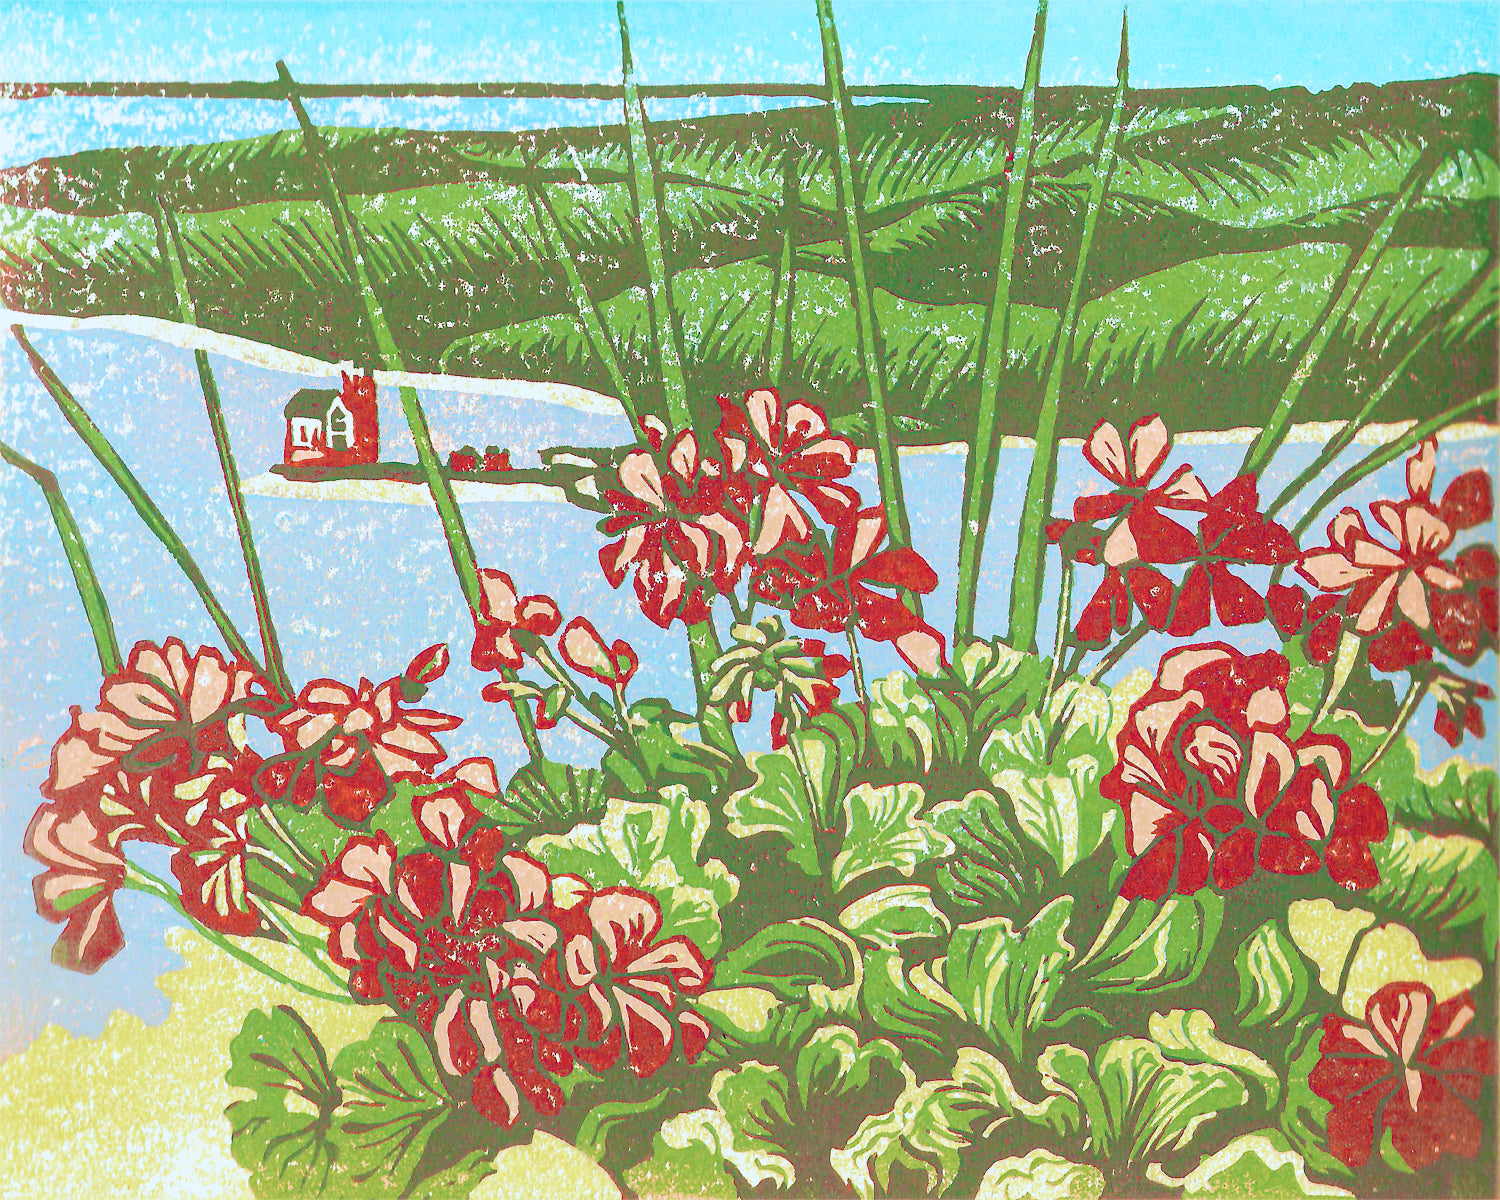 Reduction linoleum block print of bright red geranium blooms and green leaves in a pot overlooking the Round Island Lighthouse from Mackinac Island's Grand Hotel's front porch.